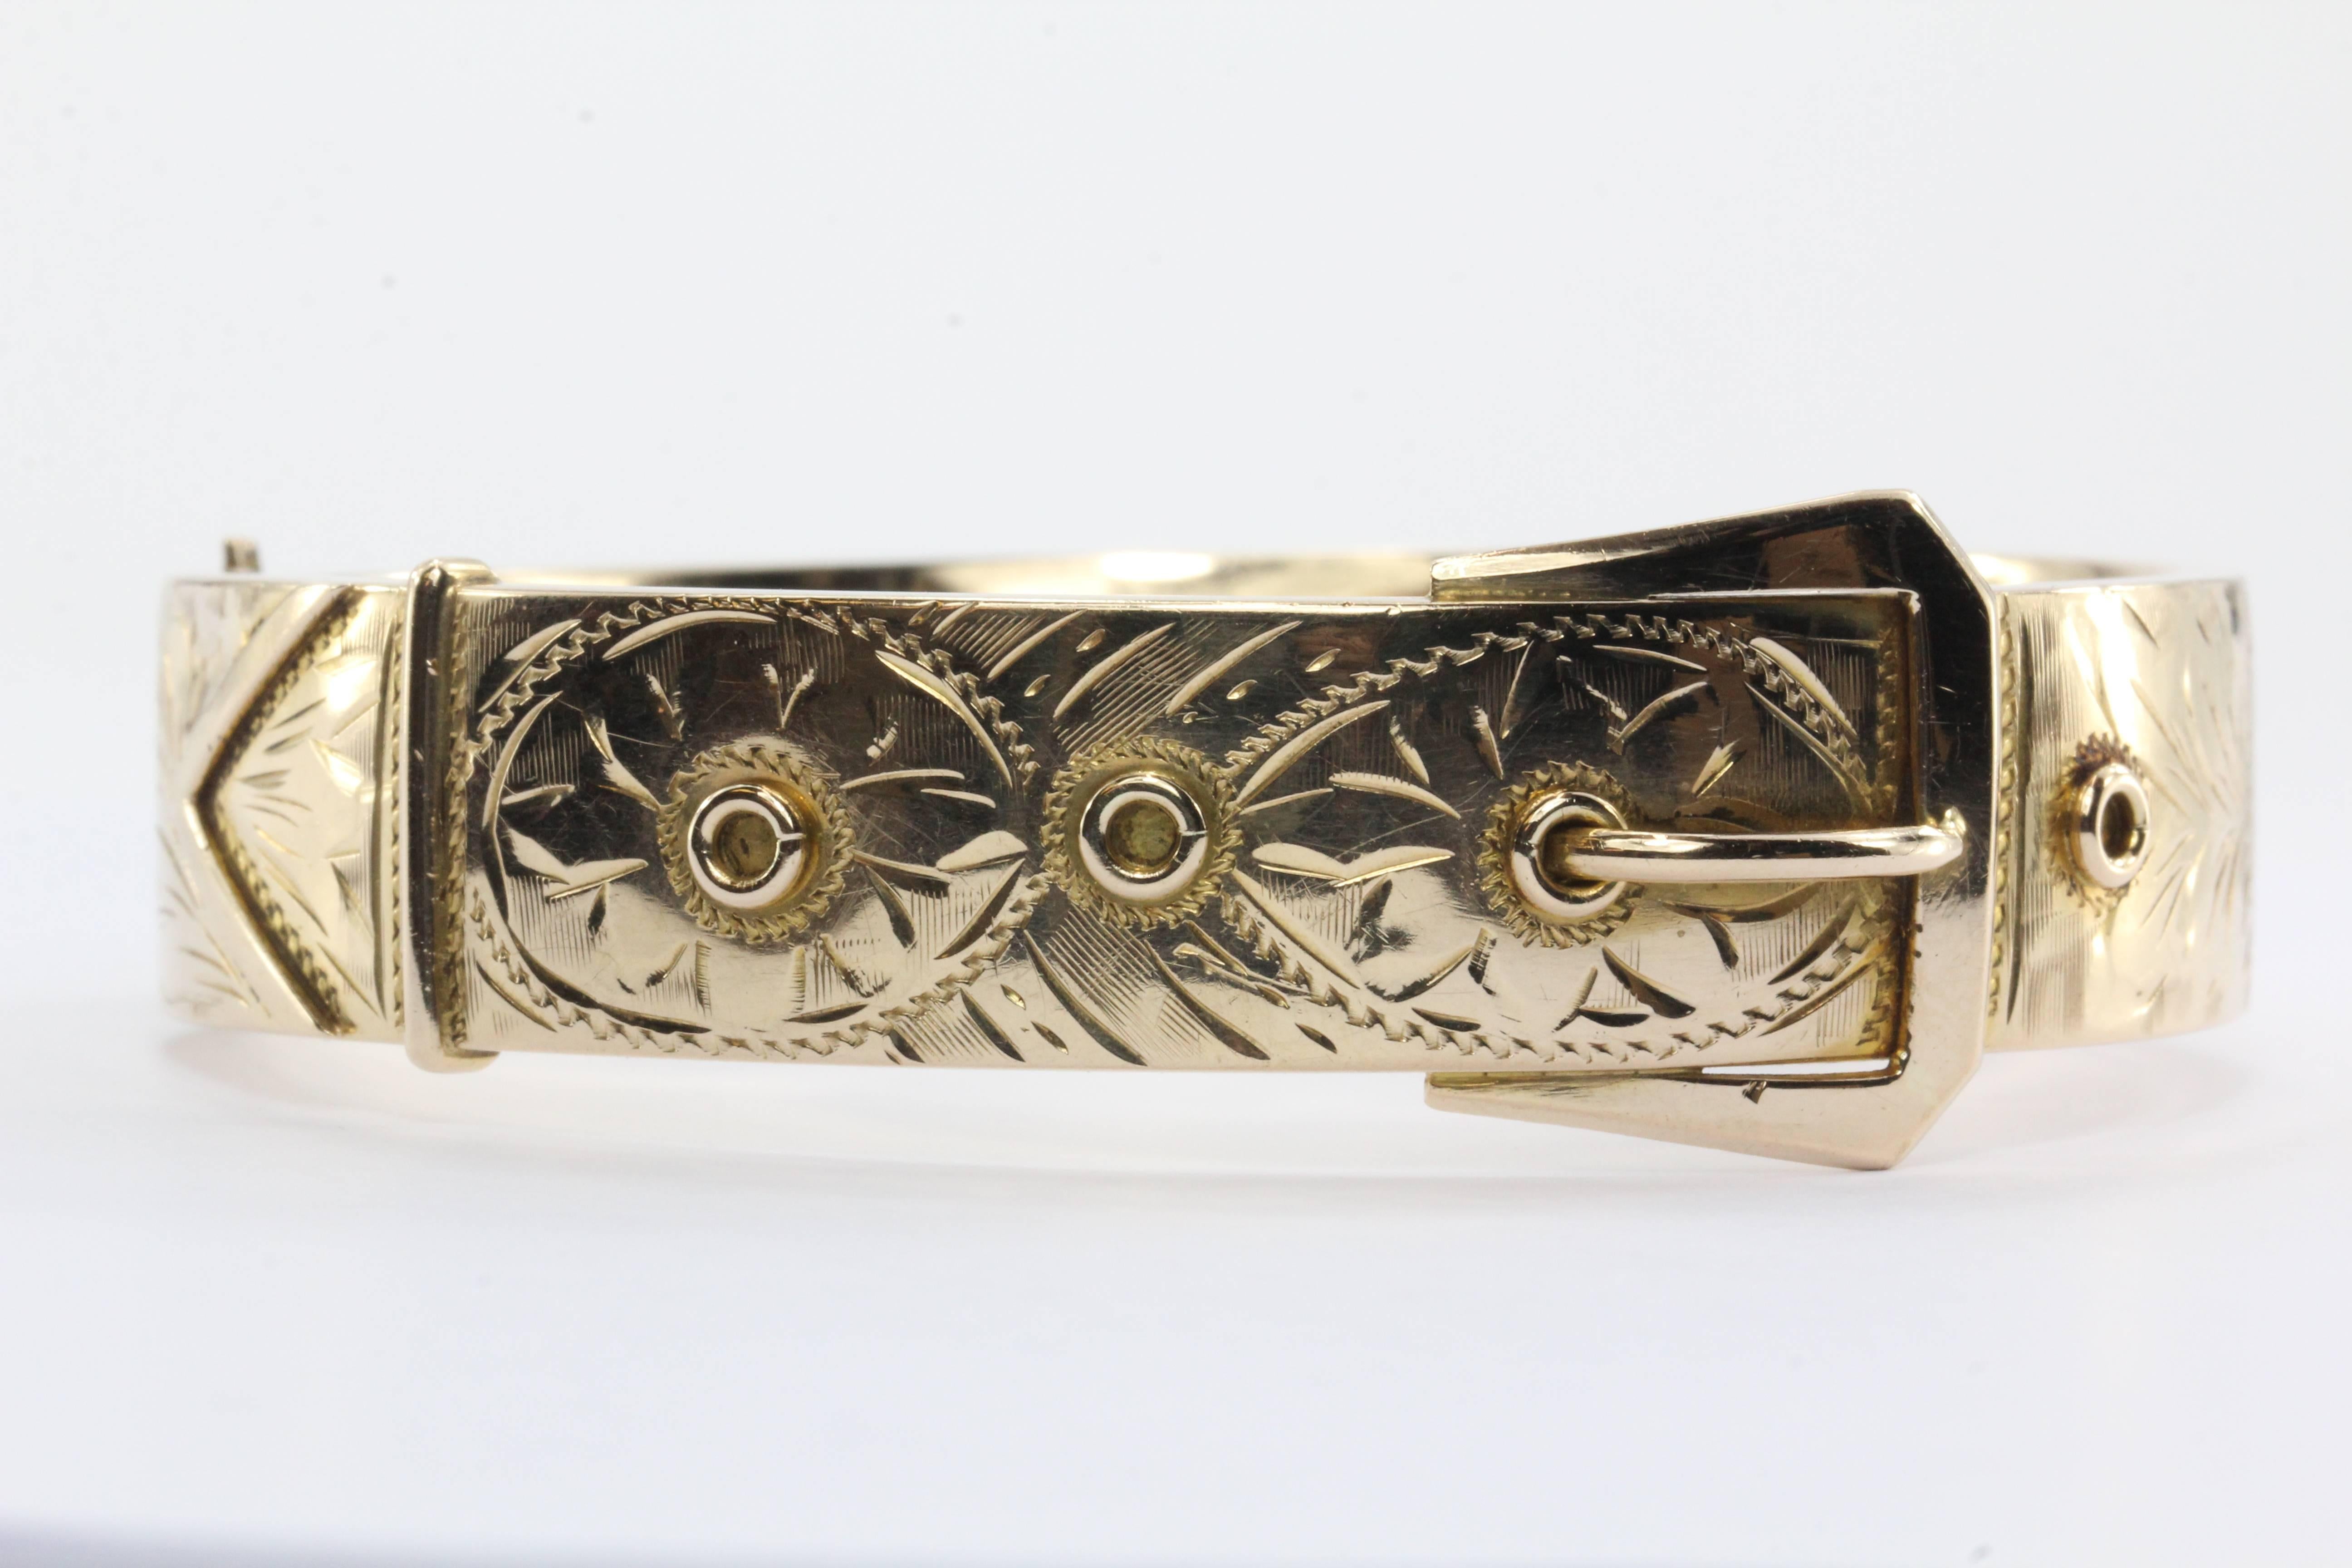 Antique 1918 Edwardian 14K Gold Belt Buckle Large Chunky Bangle Bracelet. The bracelet is in great antique estate condition and ready to wear. There are a couple very faint dents to the back of the bracelet. The piece is signed 14K COWEN 1918. The